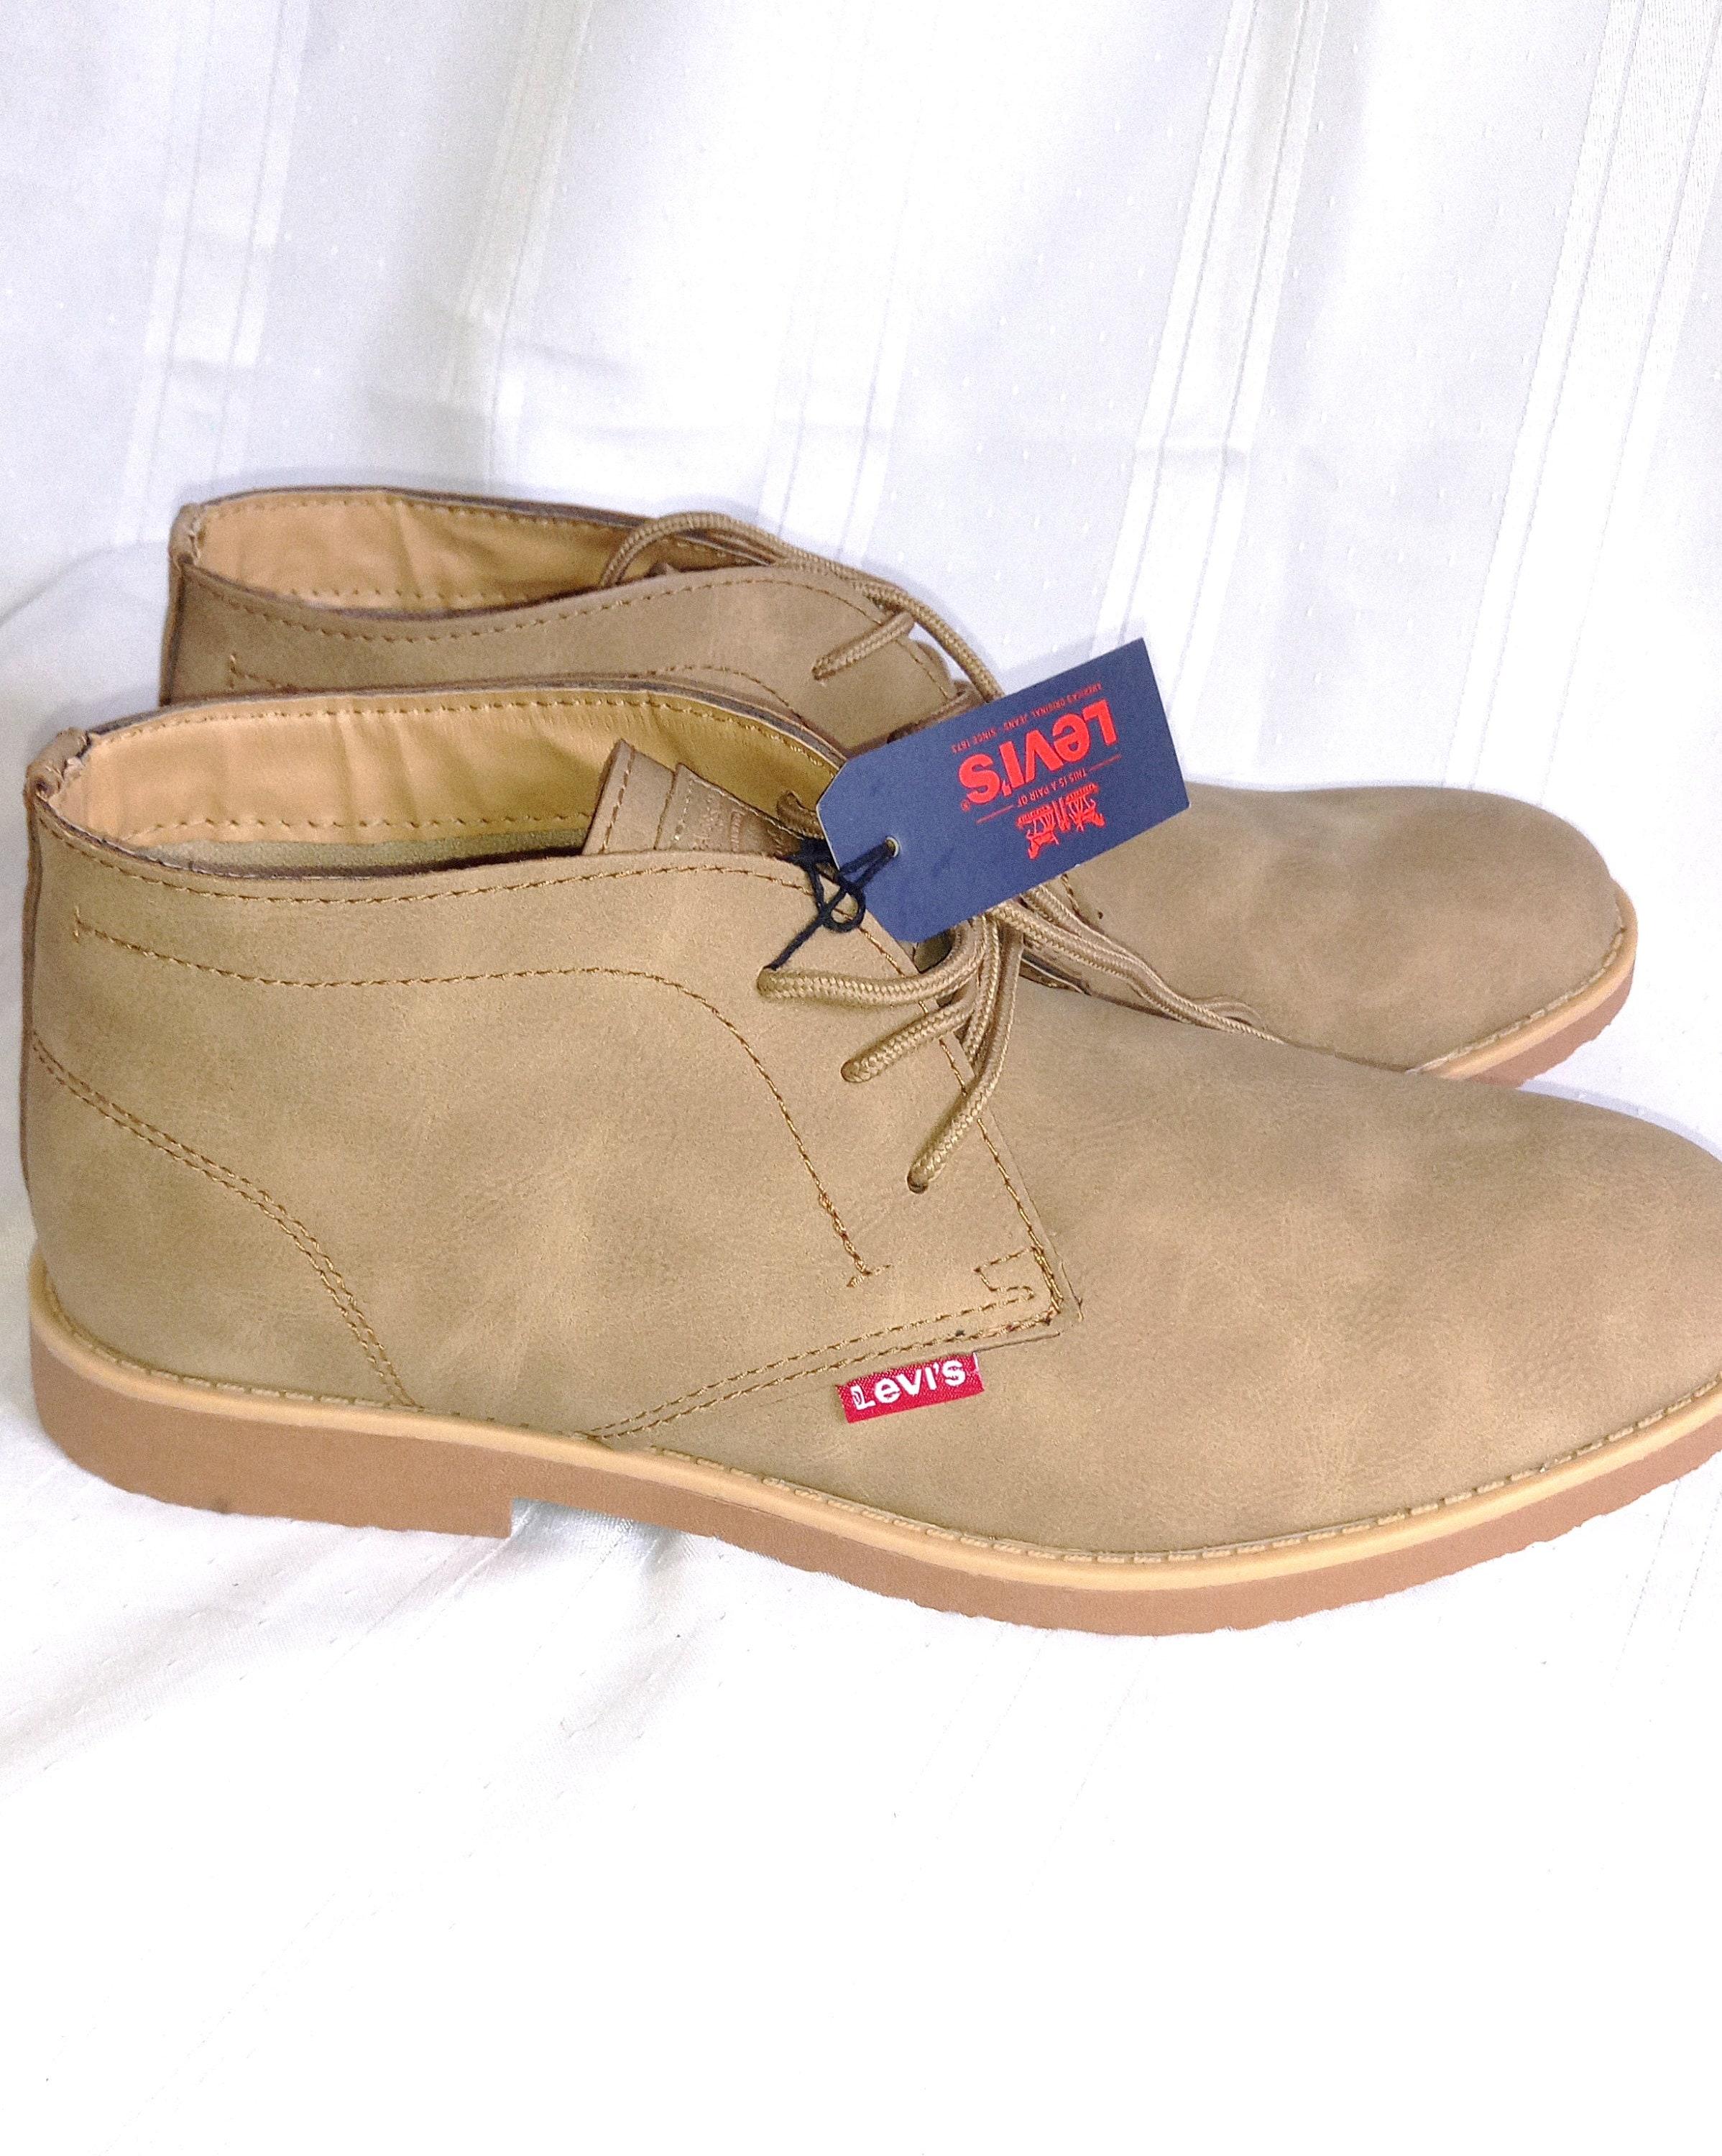 New Pair of Levi's Sonoma Shoes Sand SZ 11/dress or Casual - Etsy